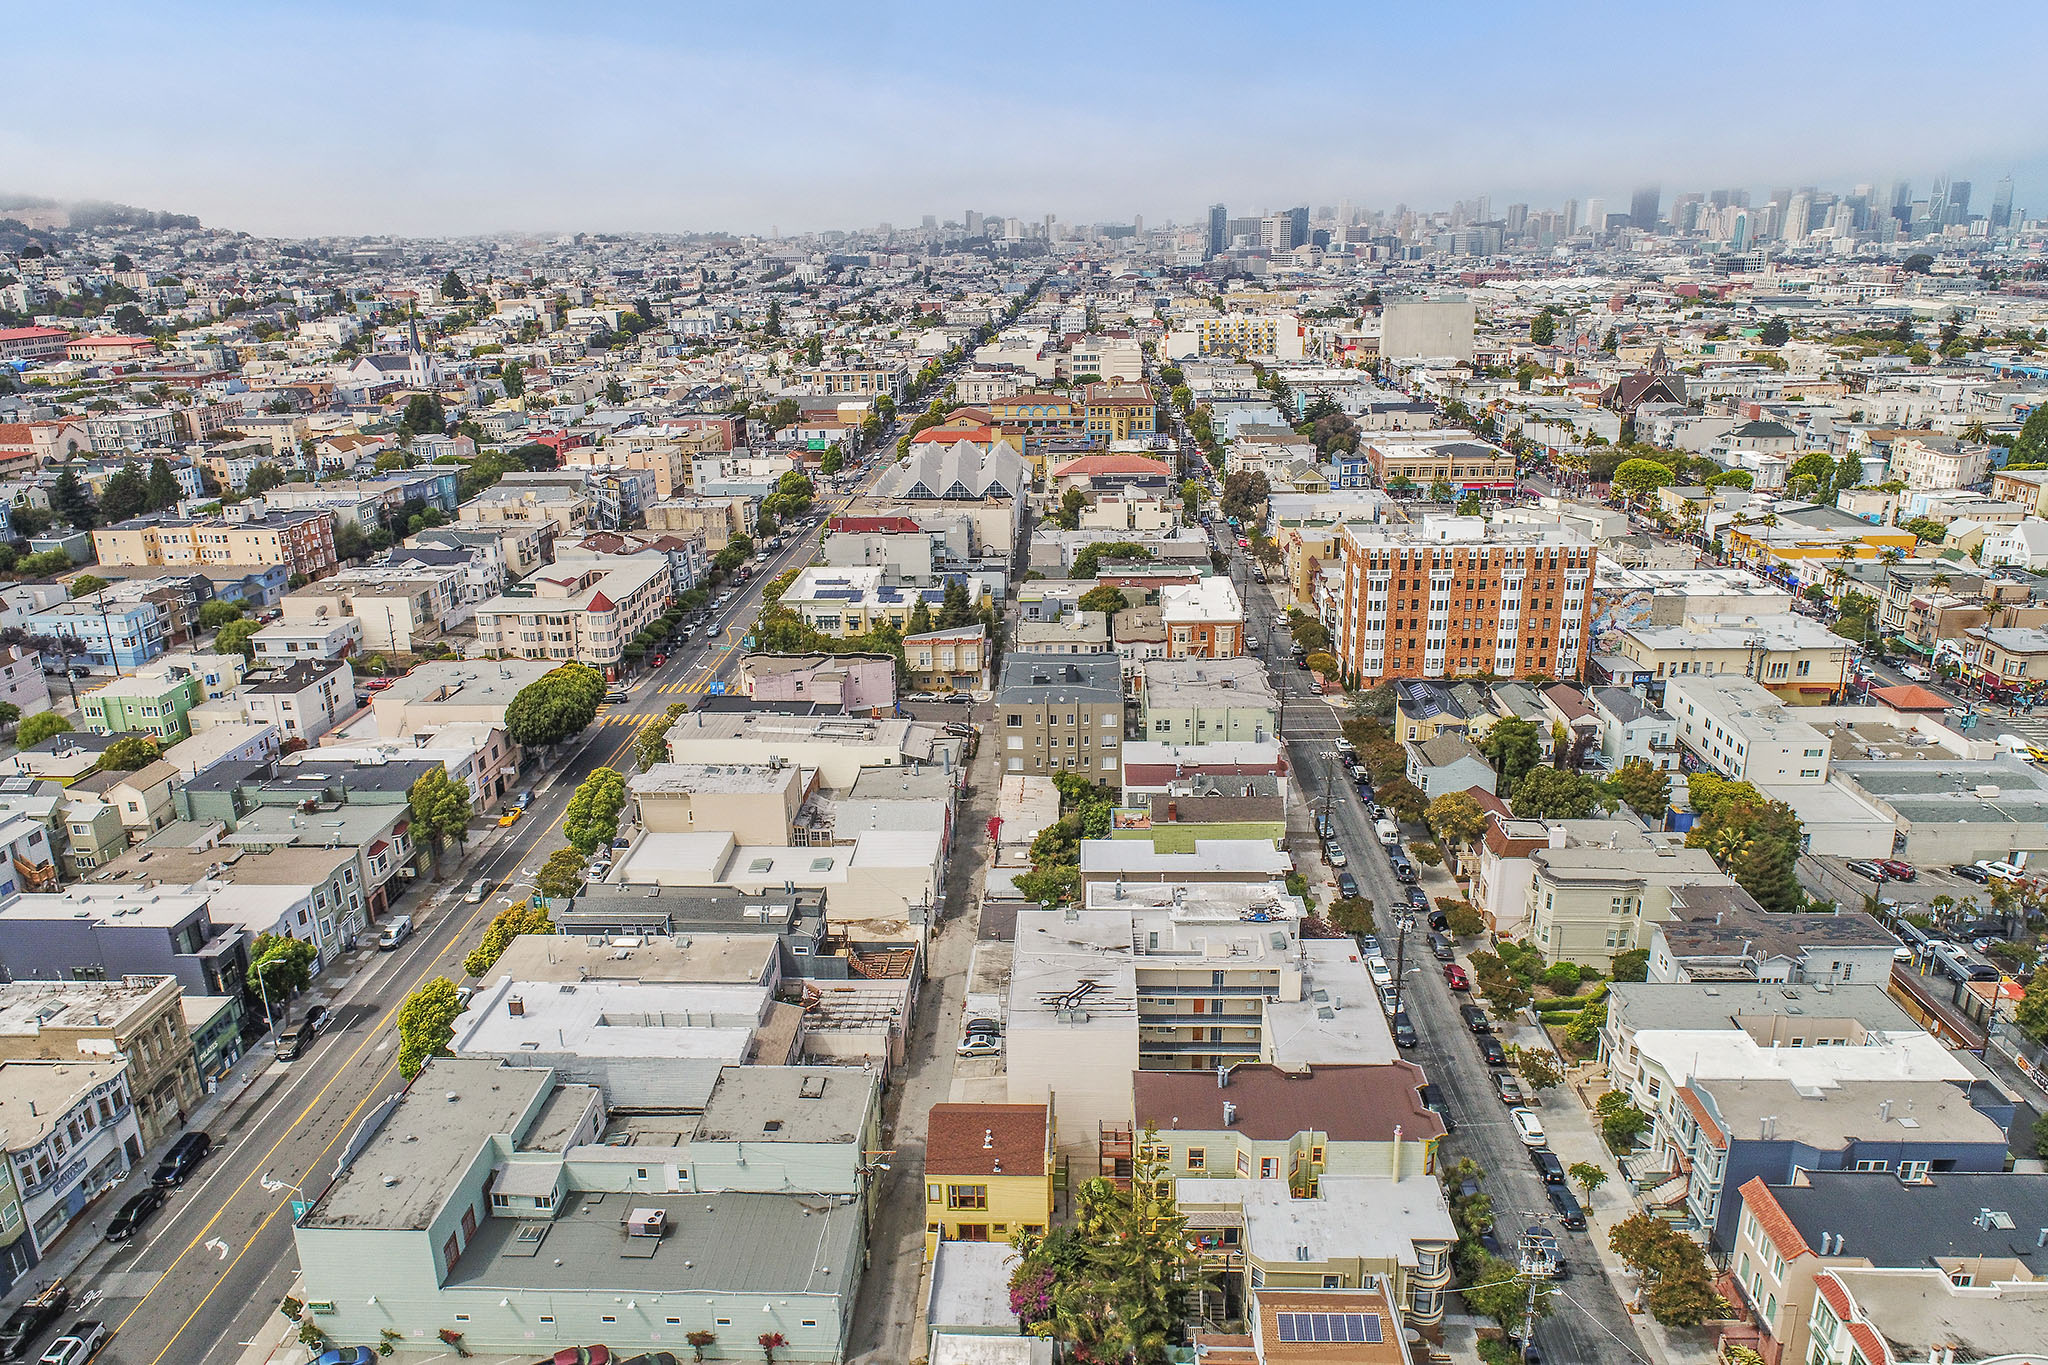 Property Photo: Aerial view as seen from 464-468 Bartlett Street, showing proximity to down town San Francisco